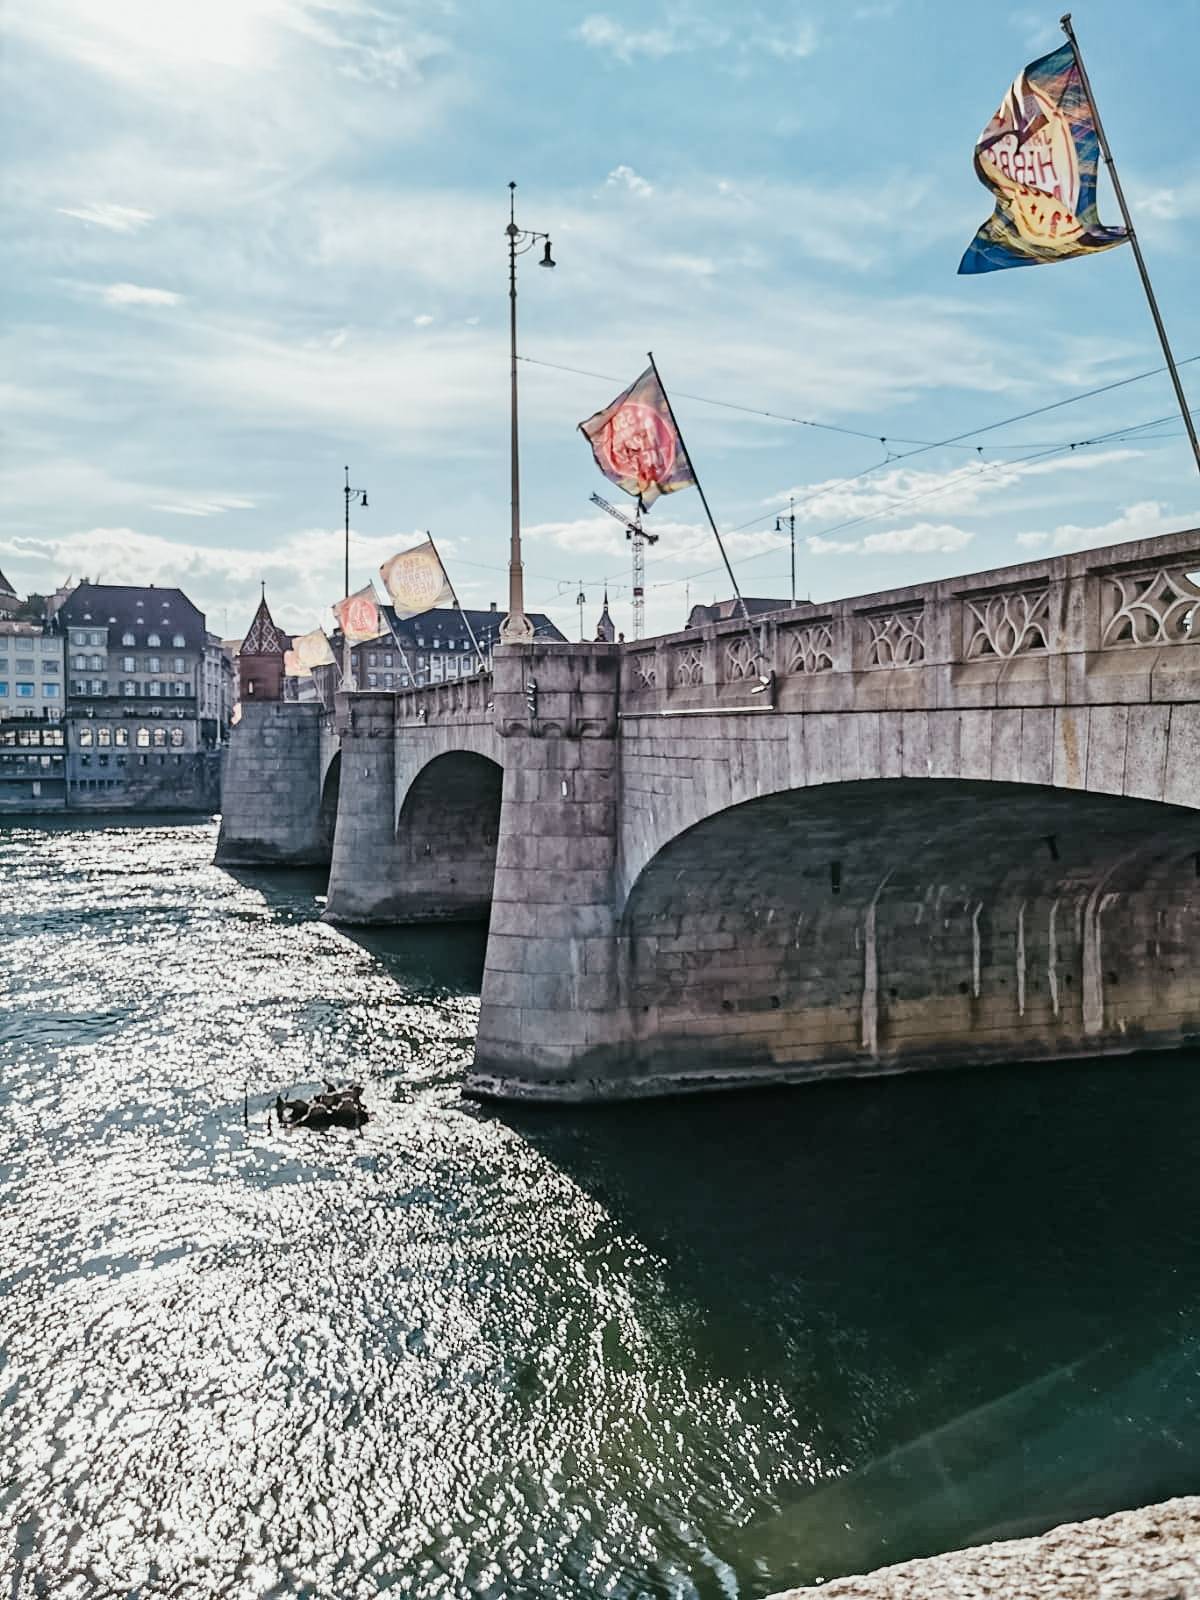 5 REASONS WHY IT'S WORTH VISITING BEAUTIFUL BASEL, SWITZERLAND. A WEEKEND GUIDE